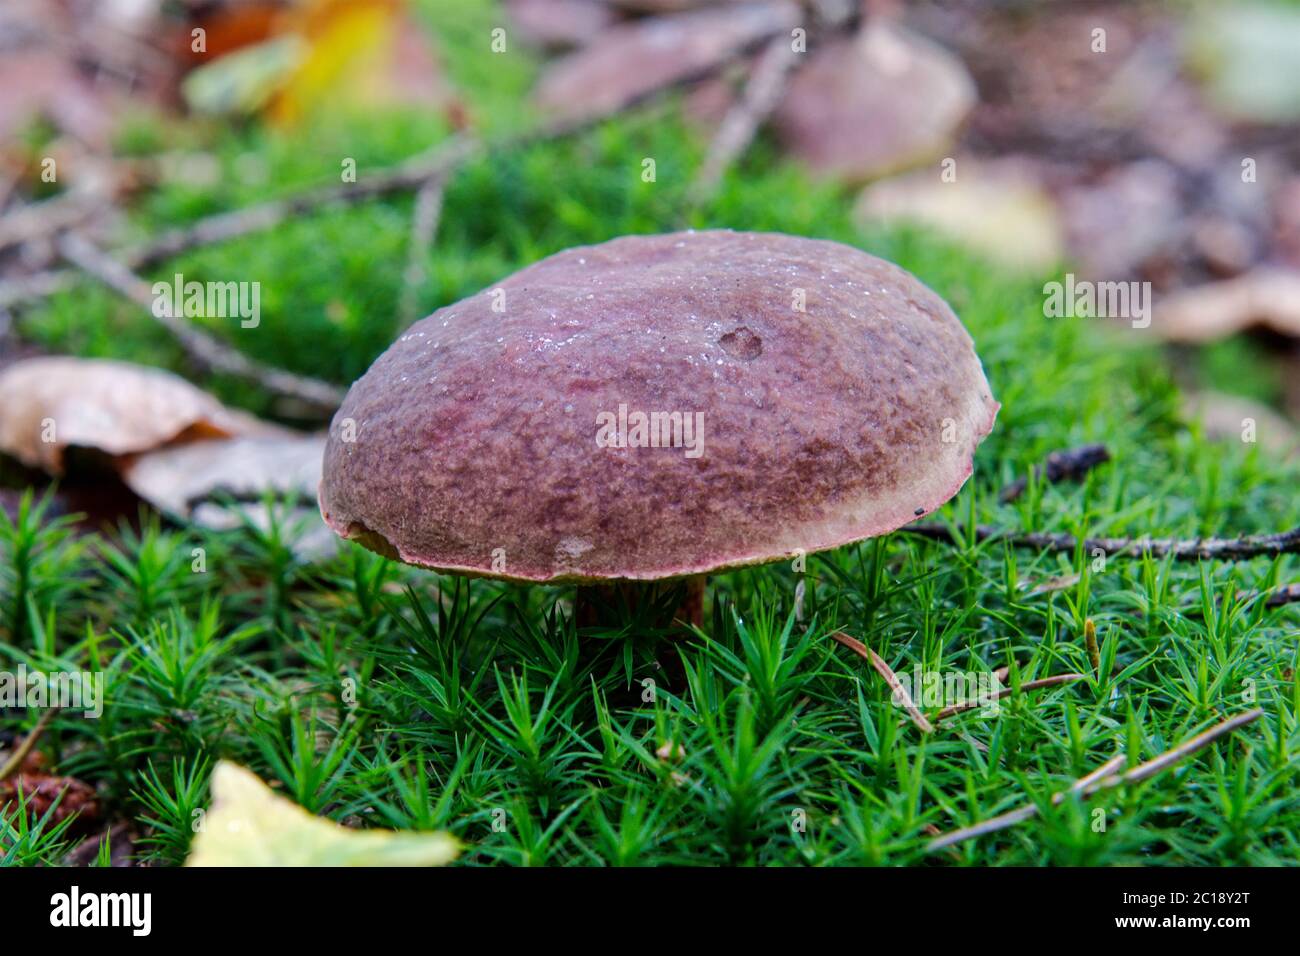 One wild mushroom growing in a forest Stock Photo